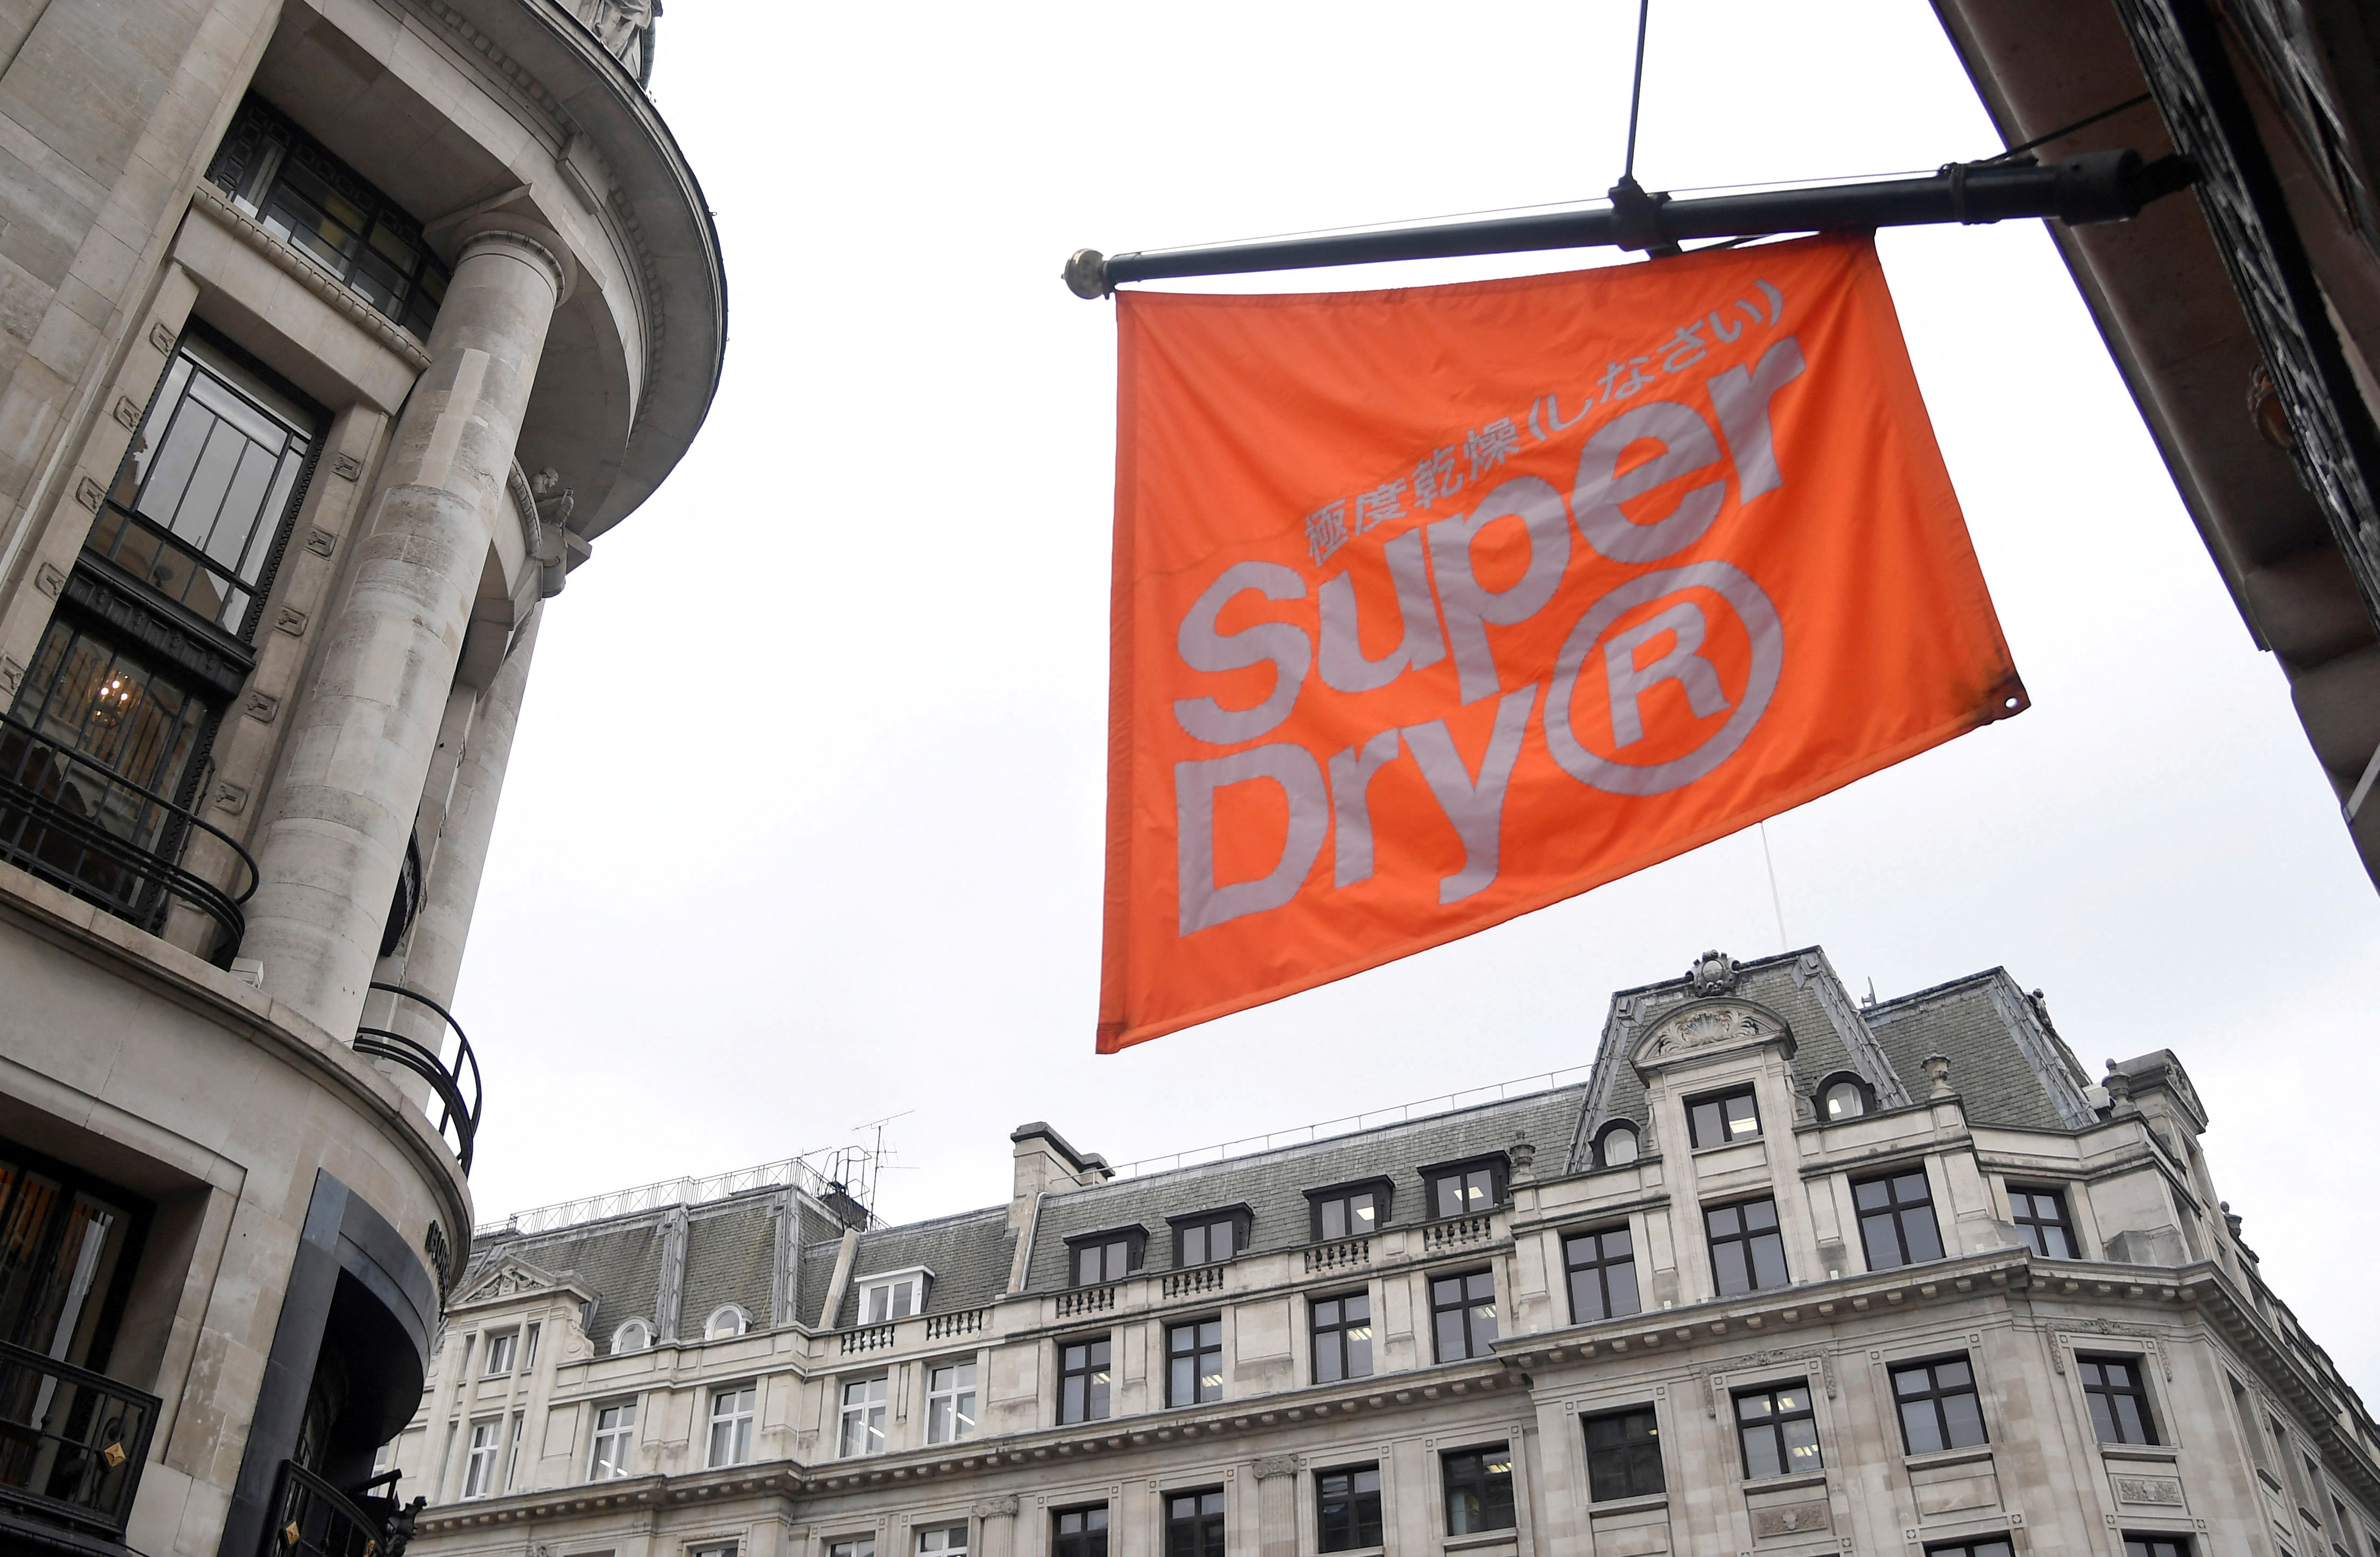 UK's Superdry and Reliance Brands Strike India Joint Venture Deal